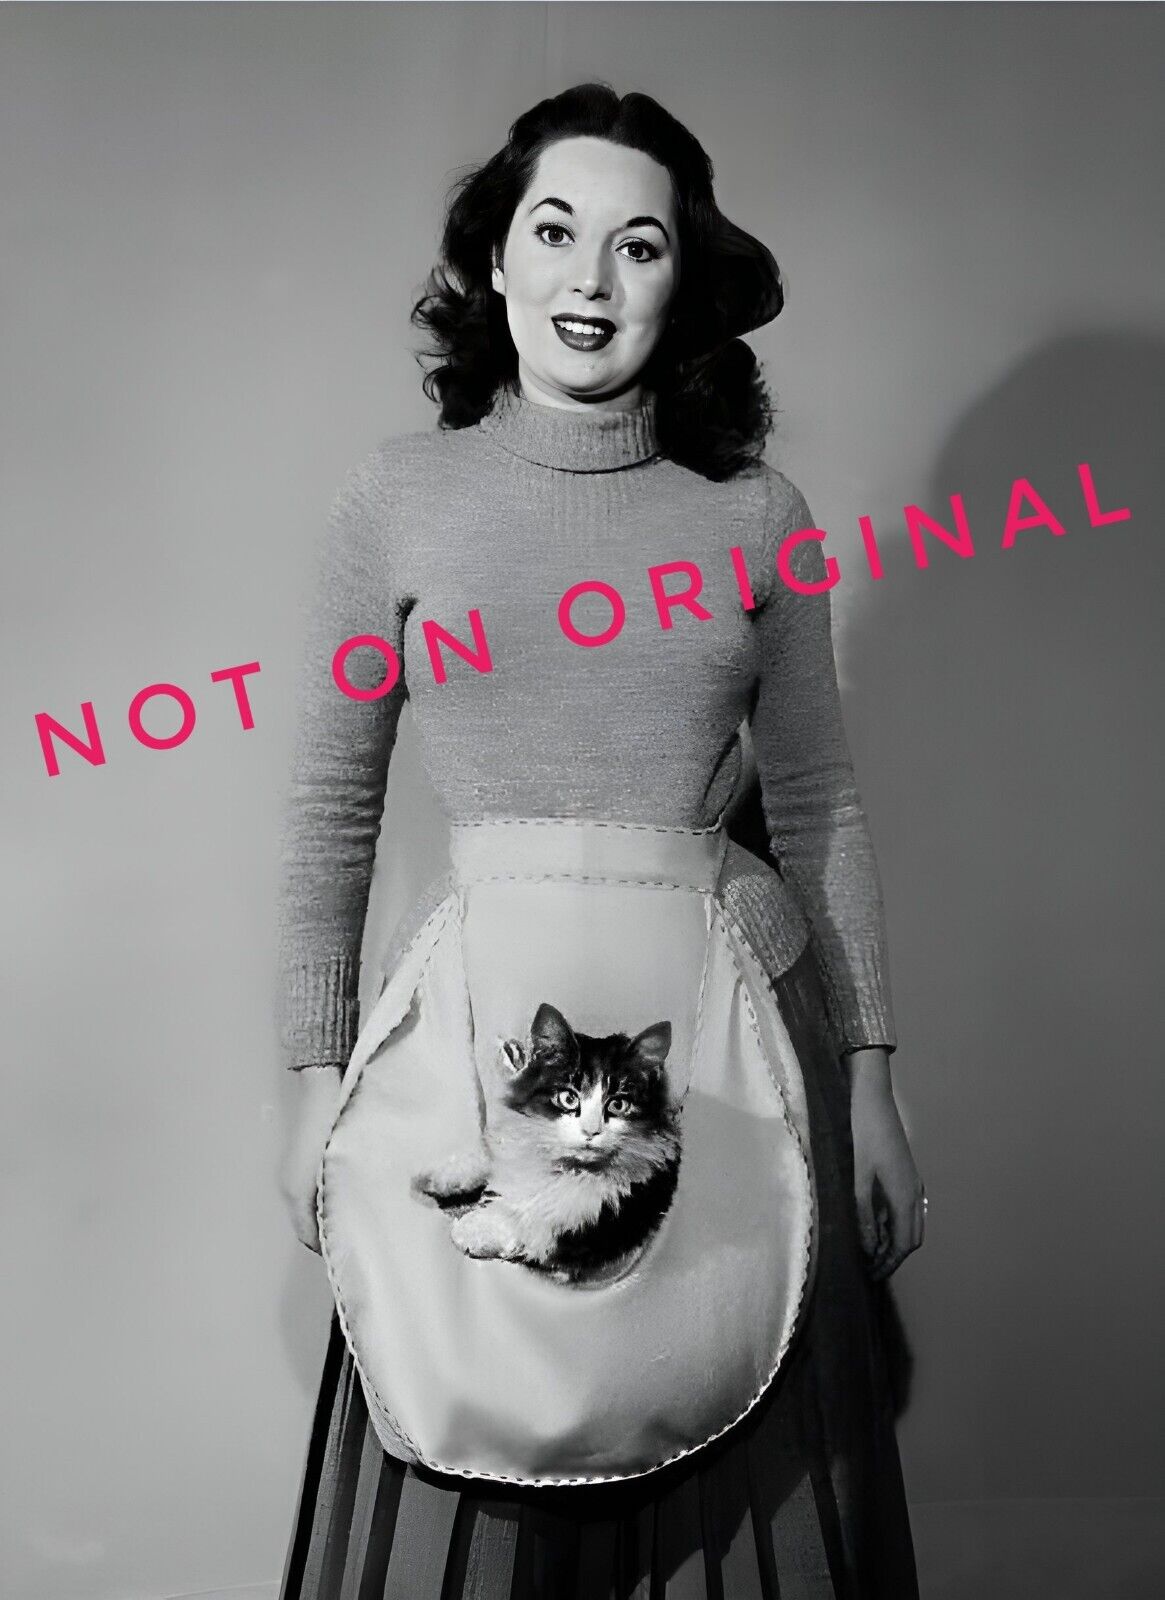 Vintage 1950s Photo Reprint of Pretty Woman Wearing Apron with Pocket for CAT 🐈